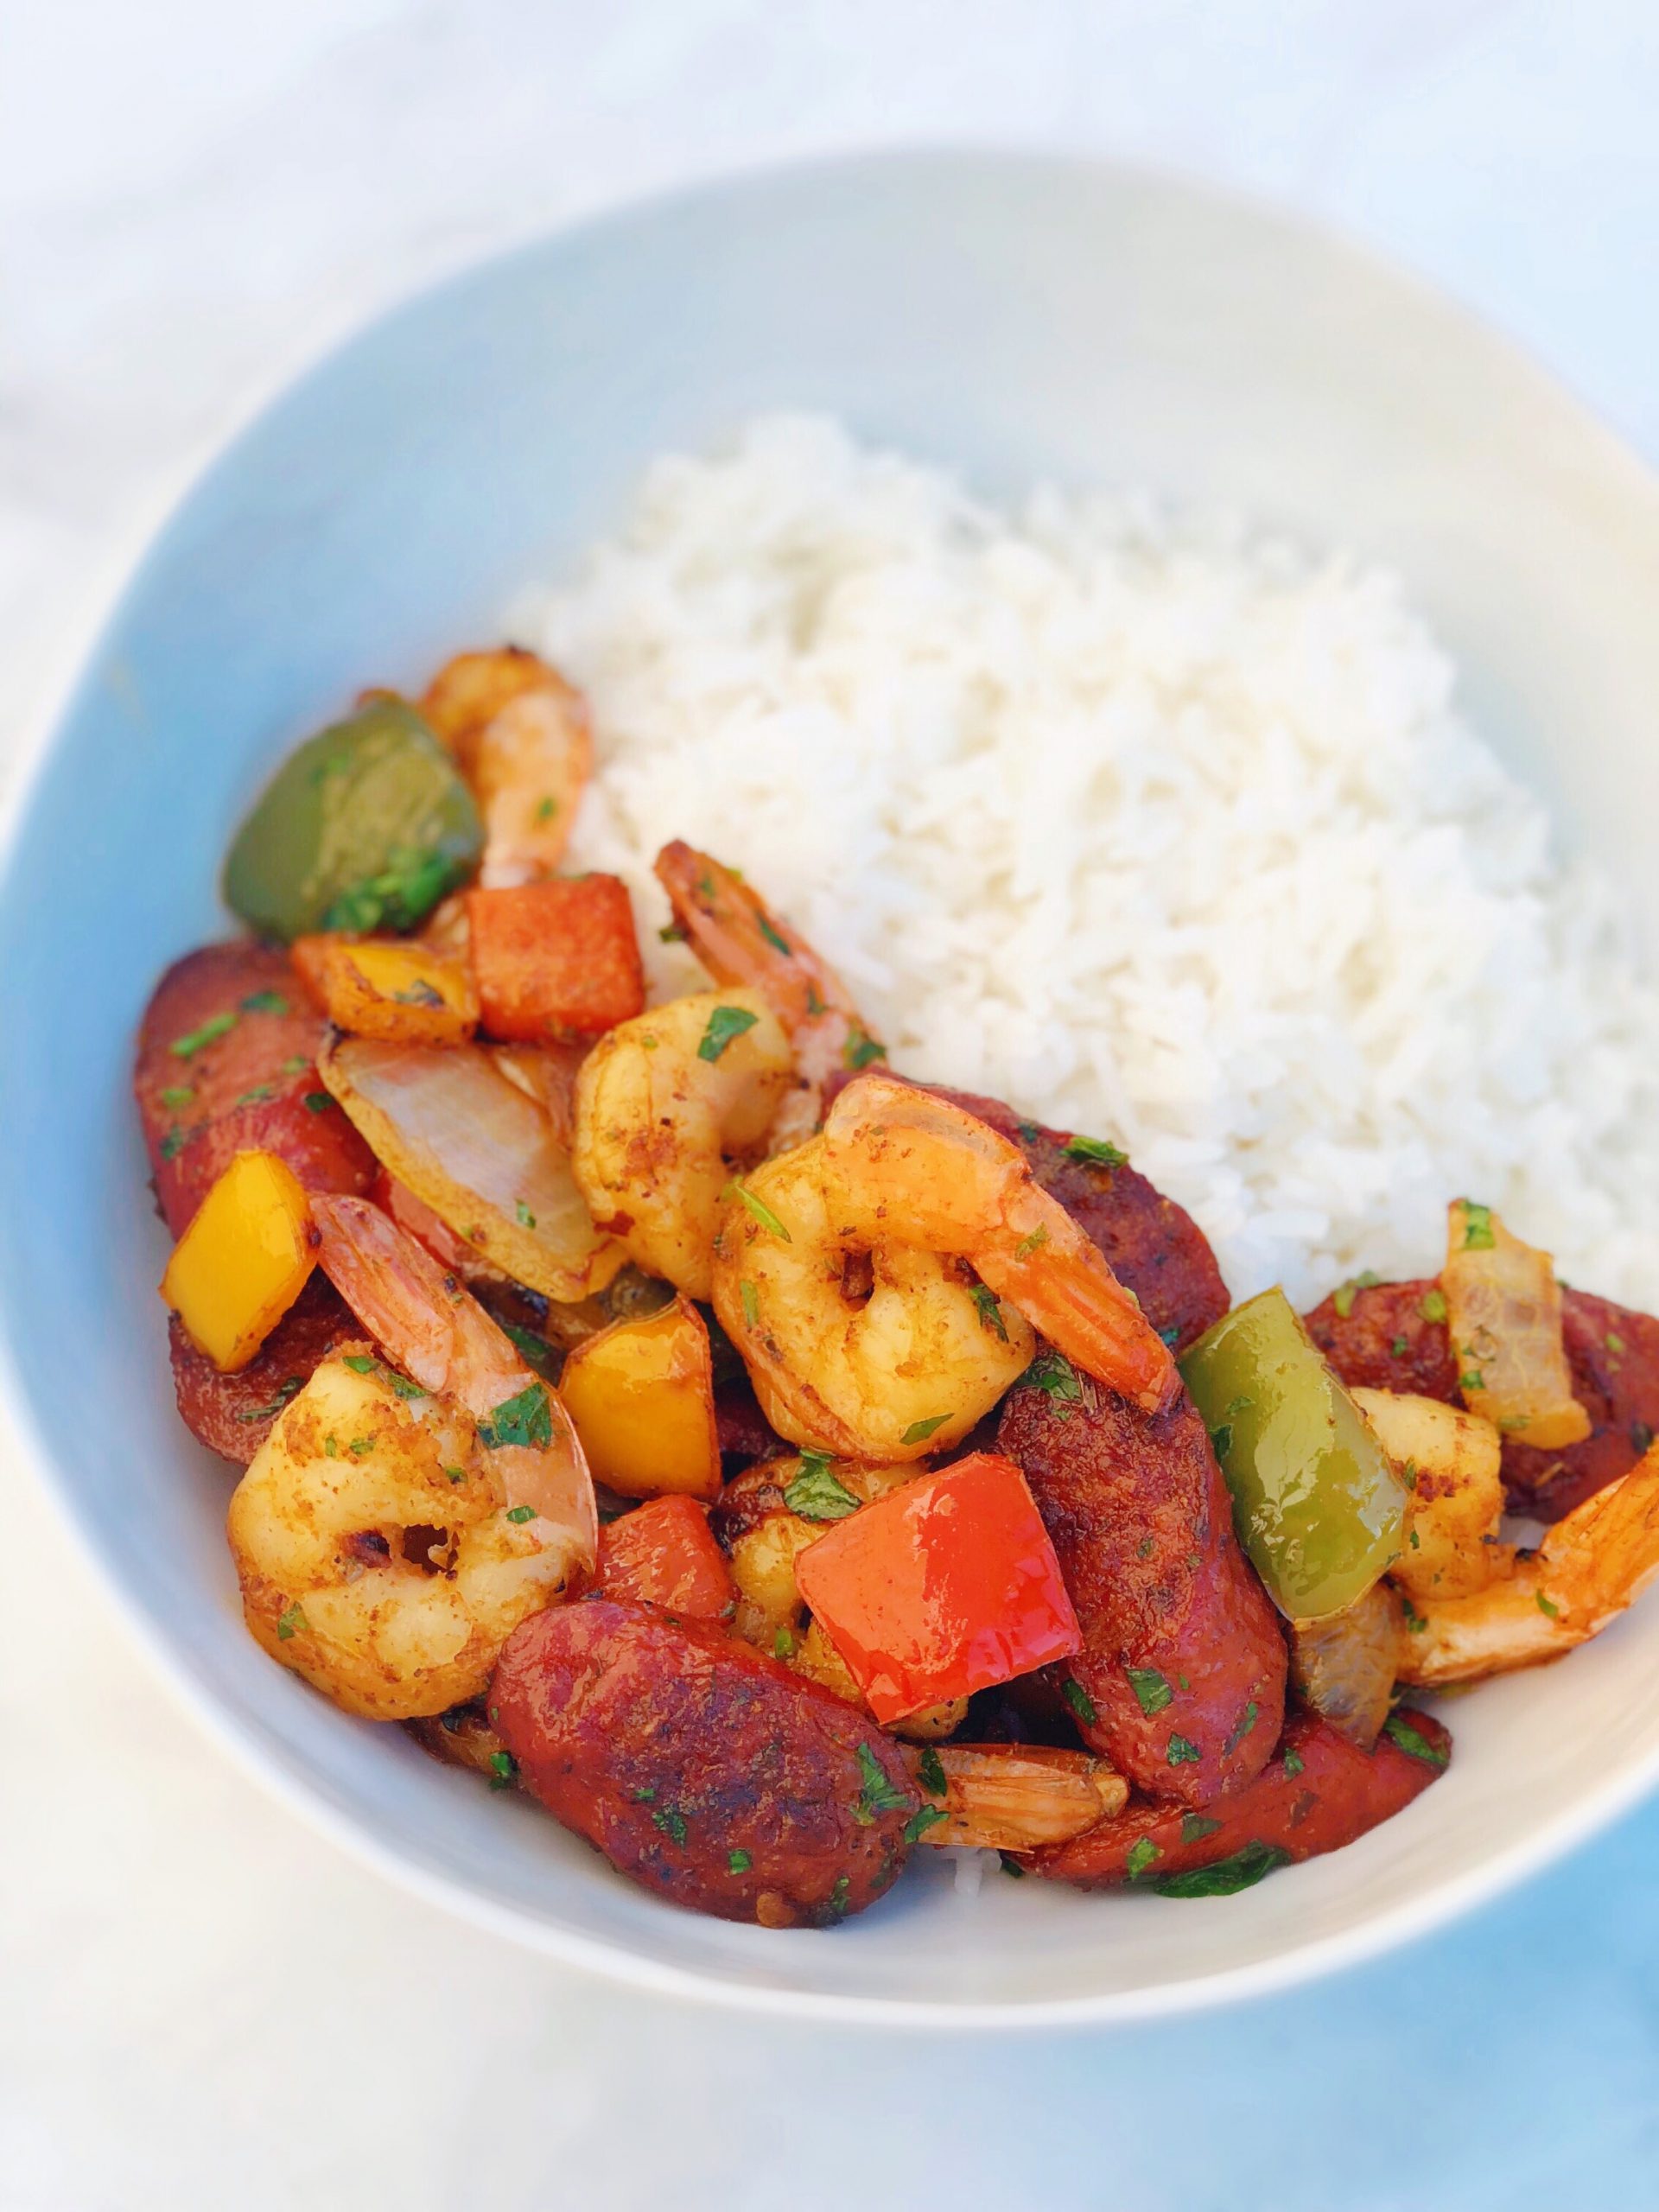 Dish of Spicy Andouille Sausage and Shrimp Stir Fry